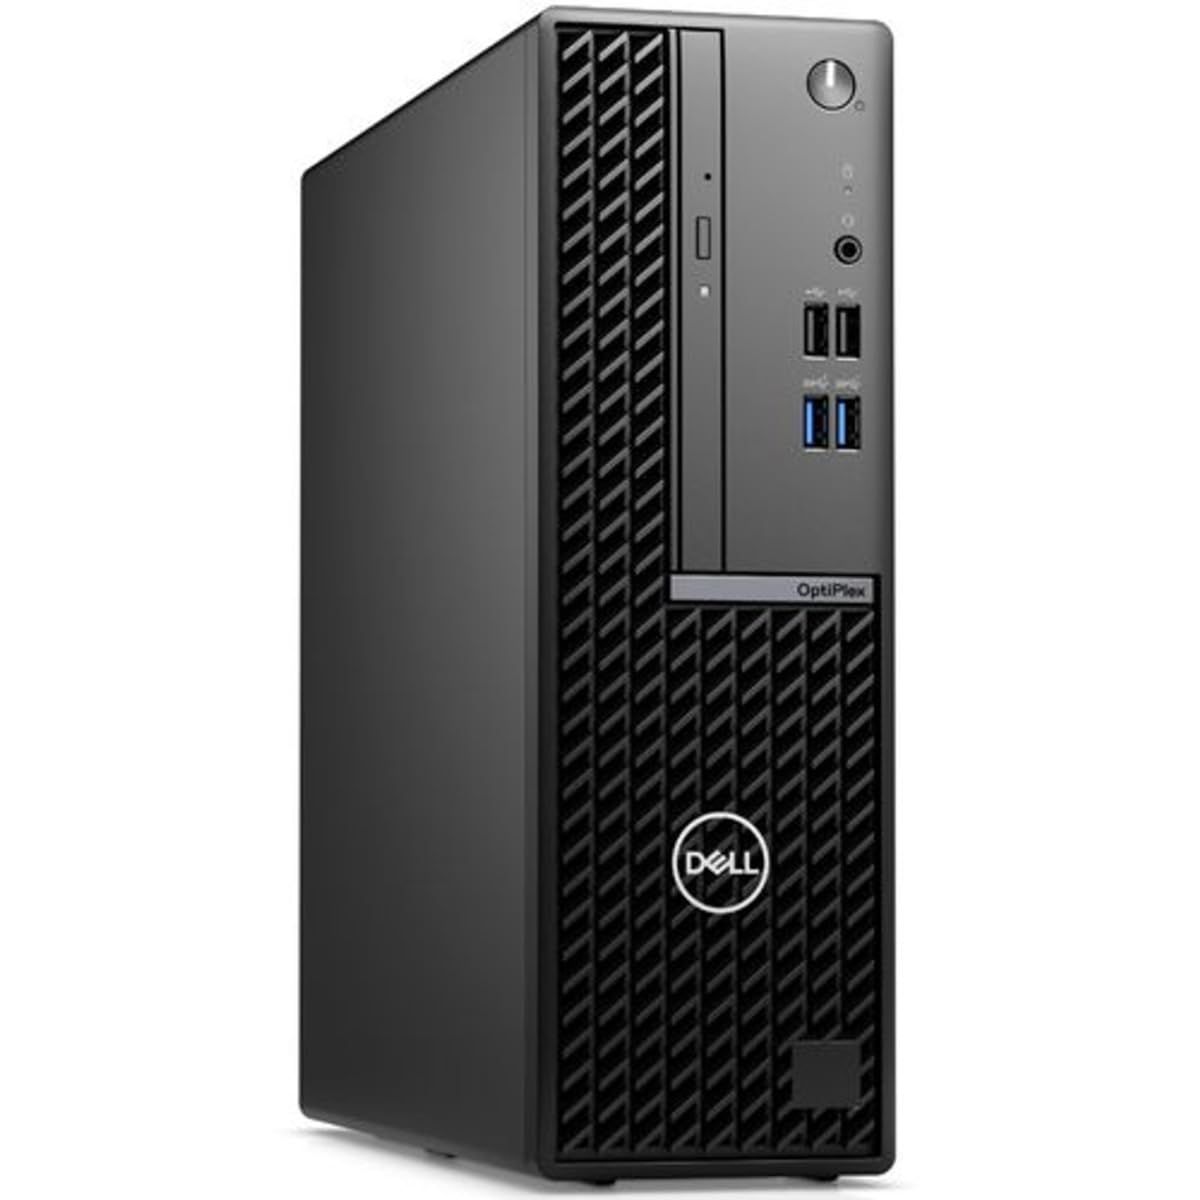 Dell Optiplex 7010 SFF, Intel Core i5-13500(6+8Cores/24MB/20T/2.5GHz to 4.8GHz),16GB(1x16)DDR4,512GB(M.2)NVMe SSD,Intel Integrated Graphics,noWiFi,Dell Optical Mouse - MS116,Dell Wired Keyboard KB216,180W,Ubuntu,3Yr ProSupport_1